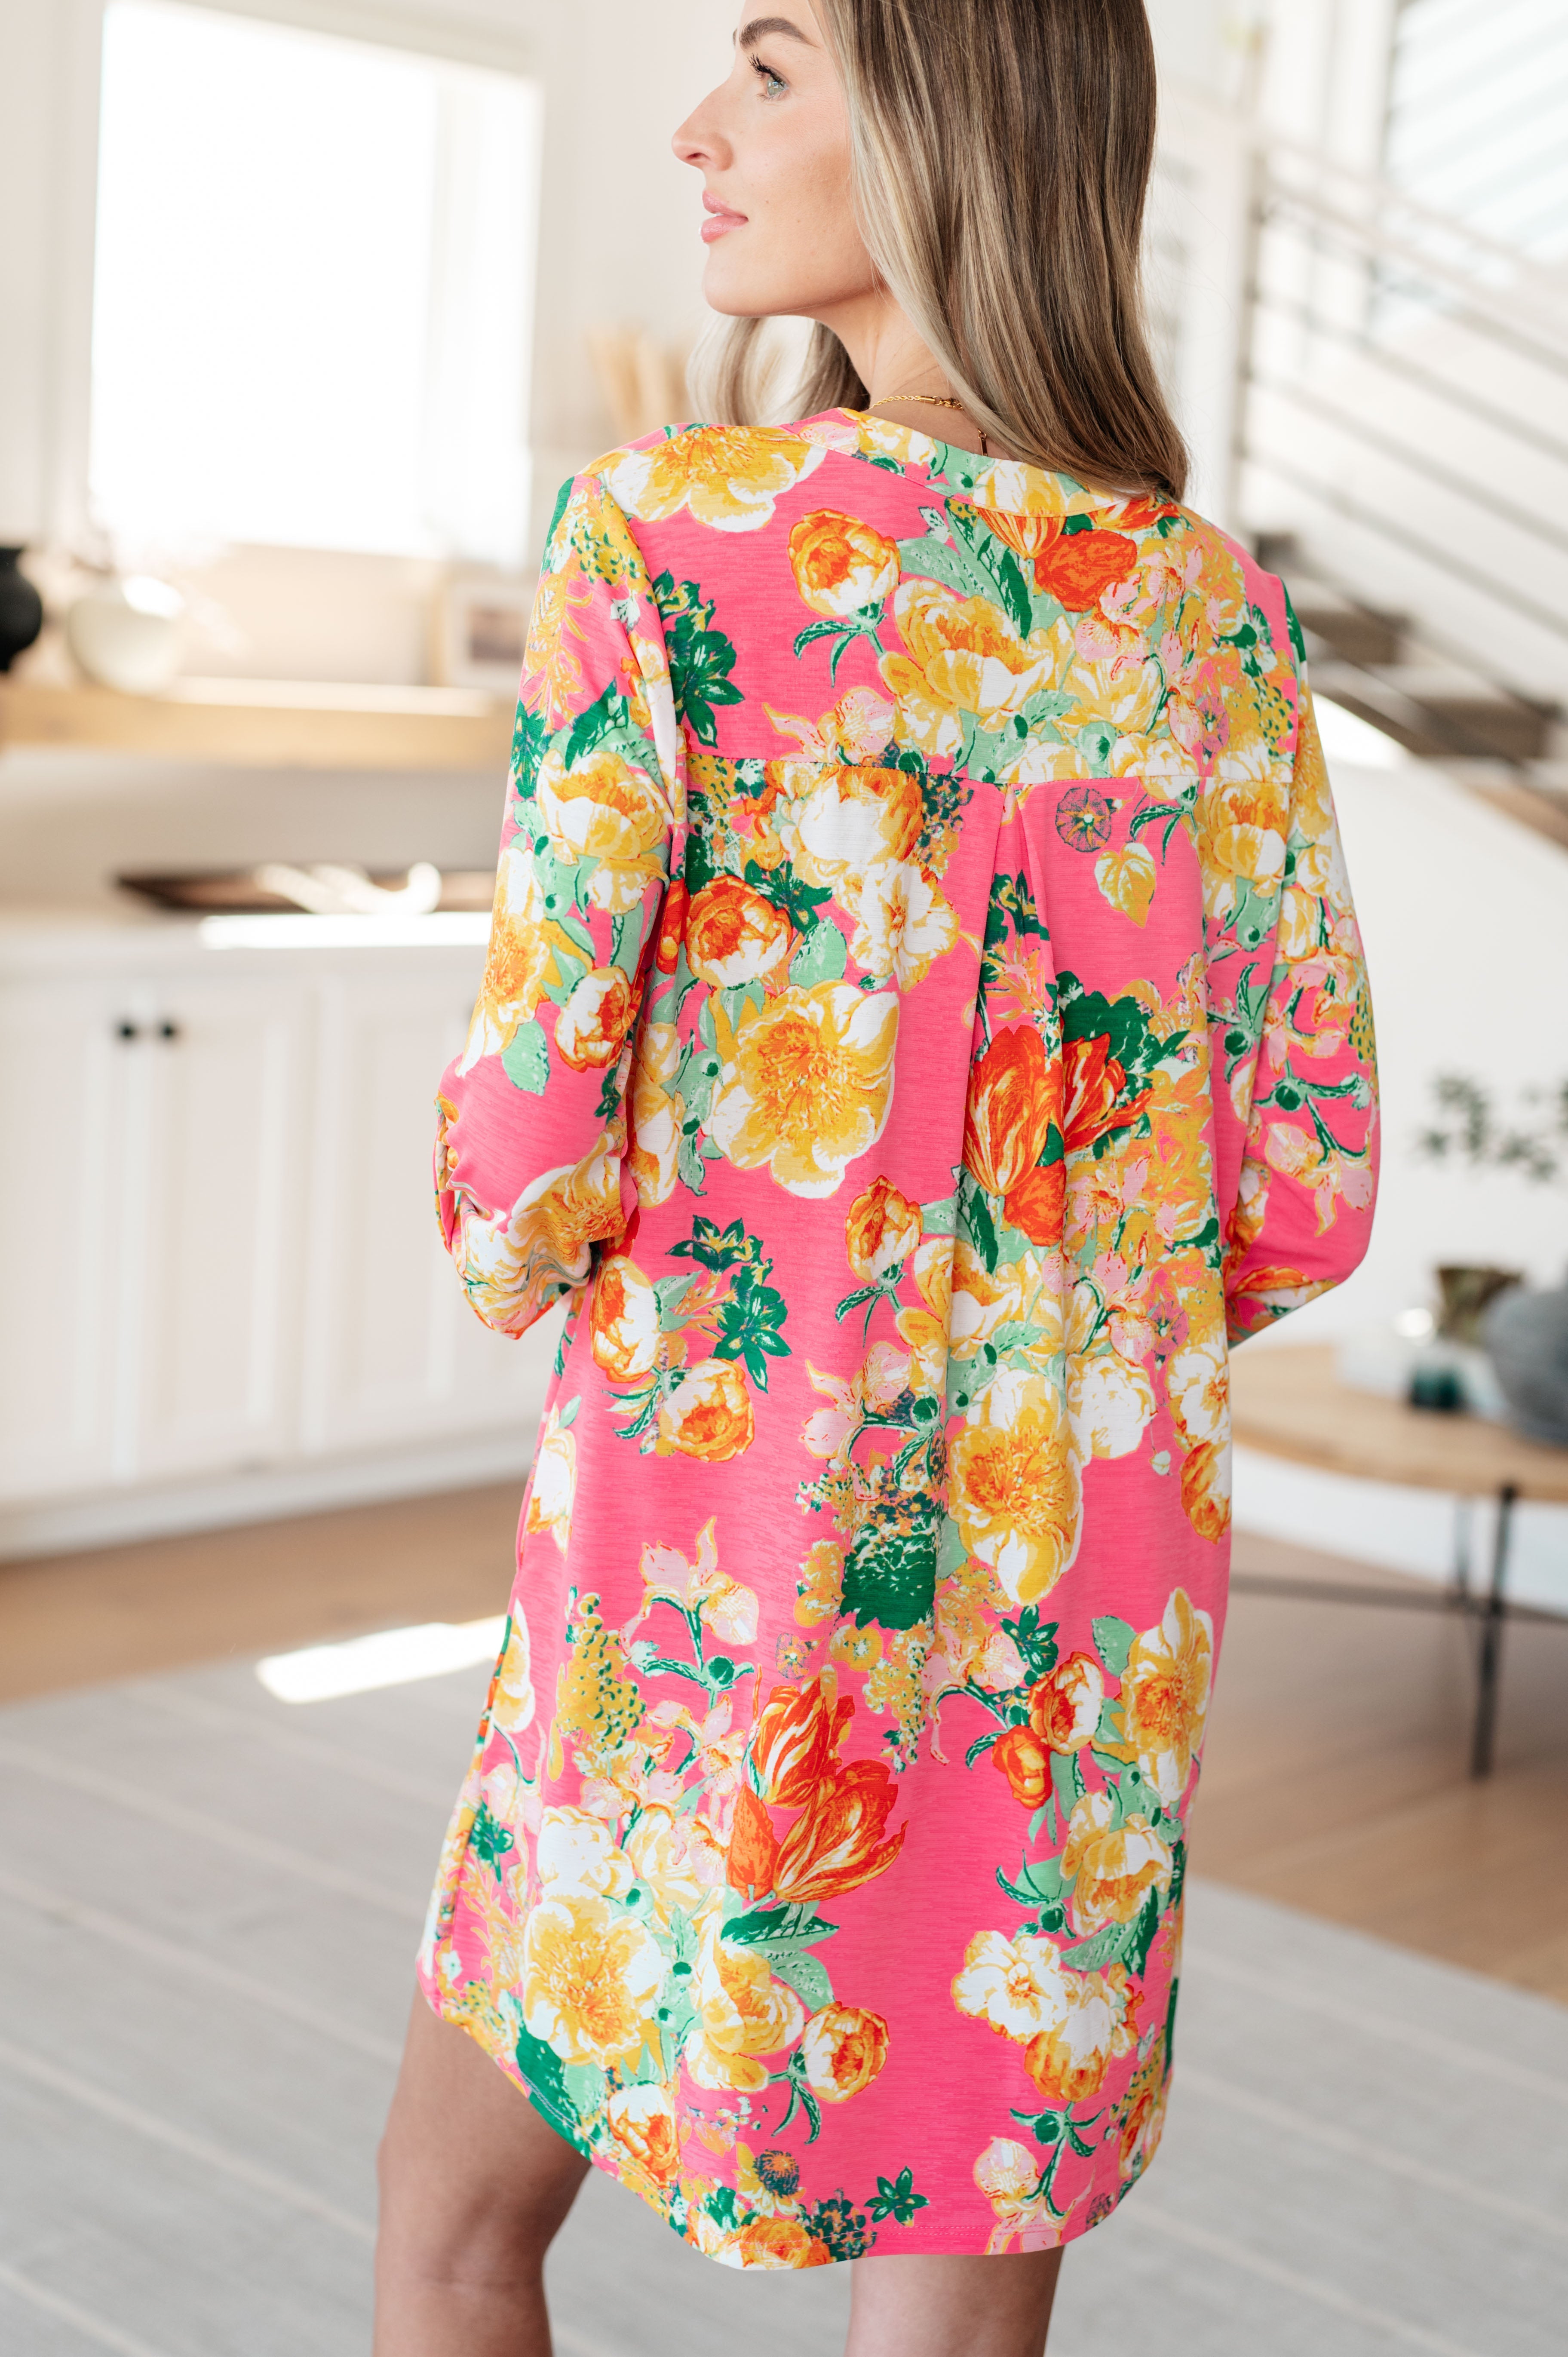 Lizzy Dress in Hot Pink and Yellow Floral Dresses Ave Shops   